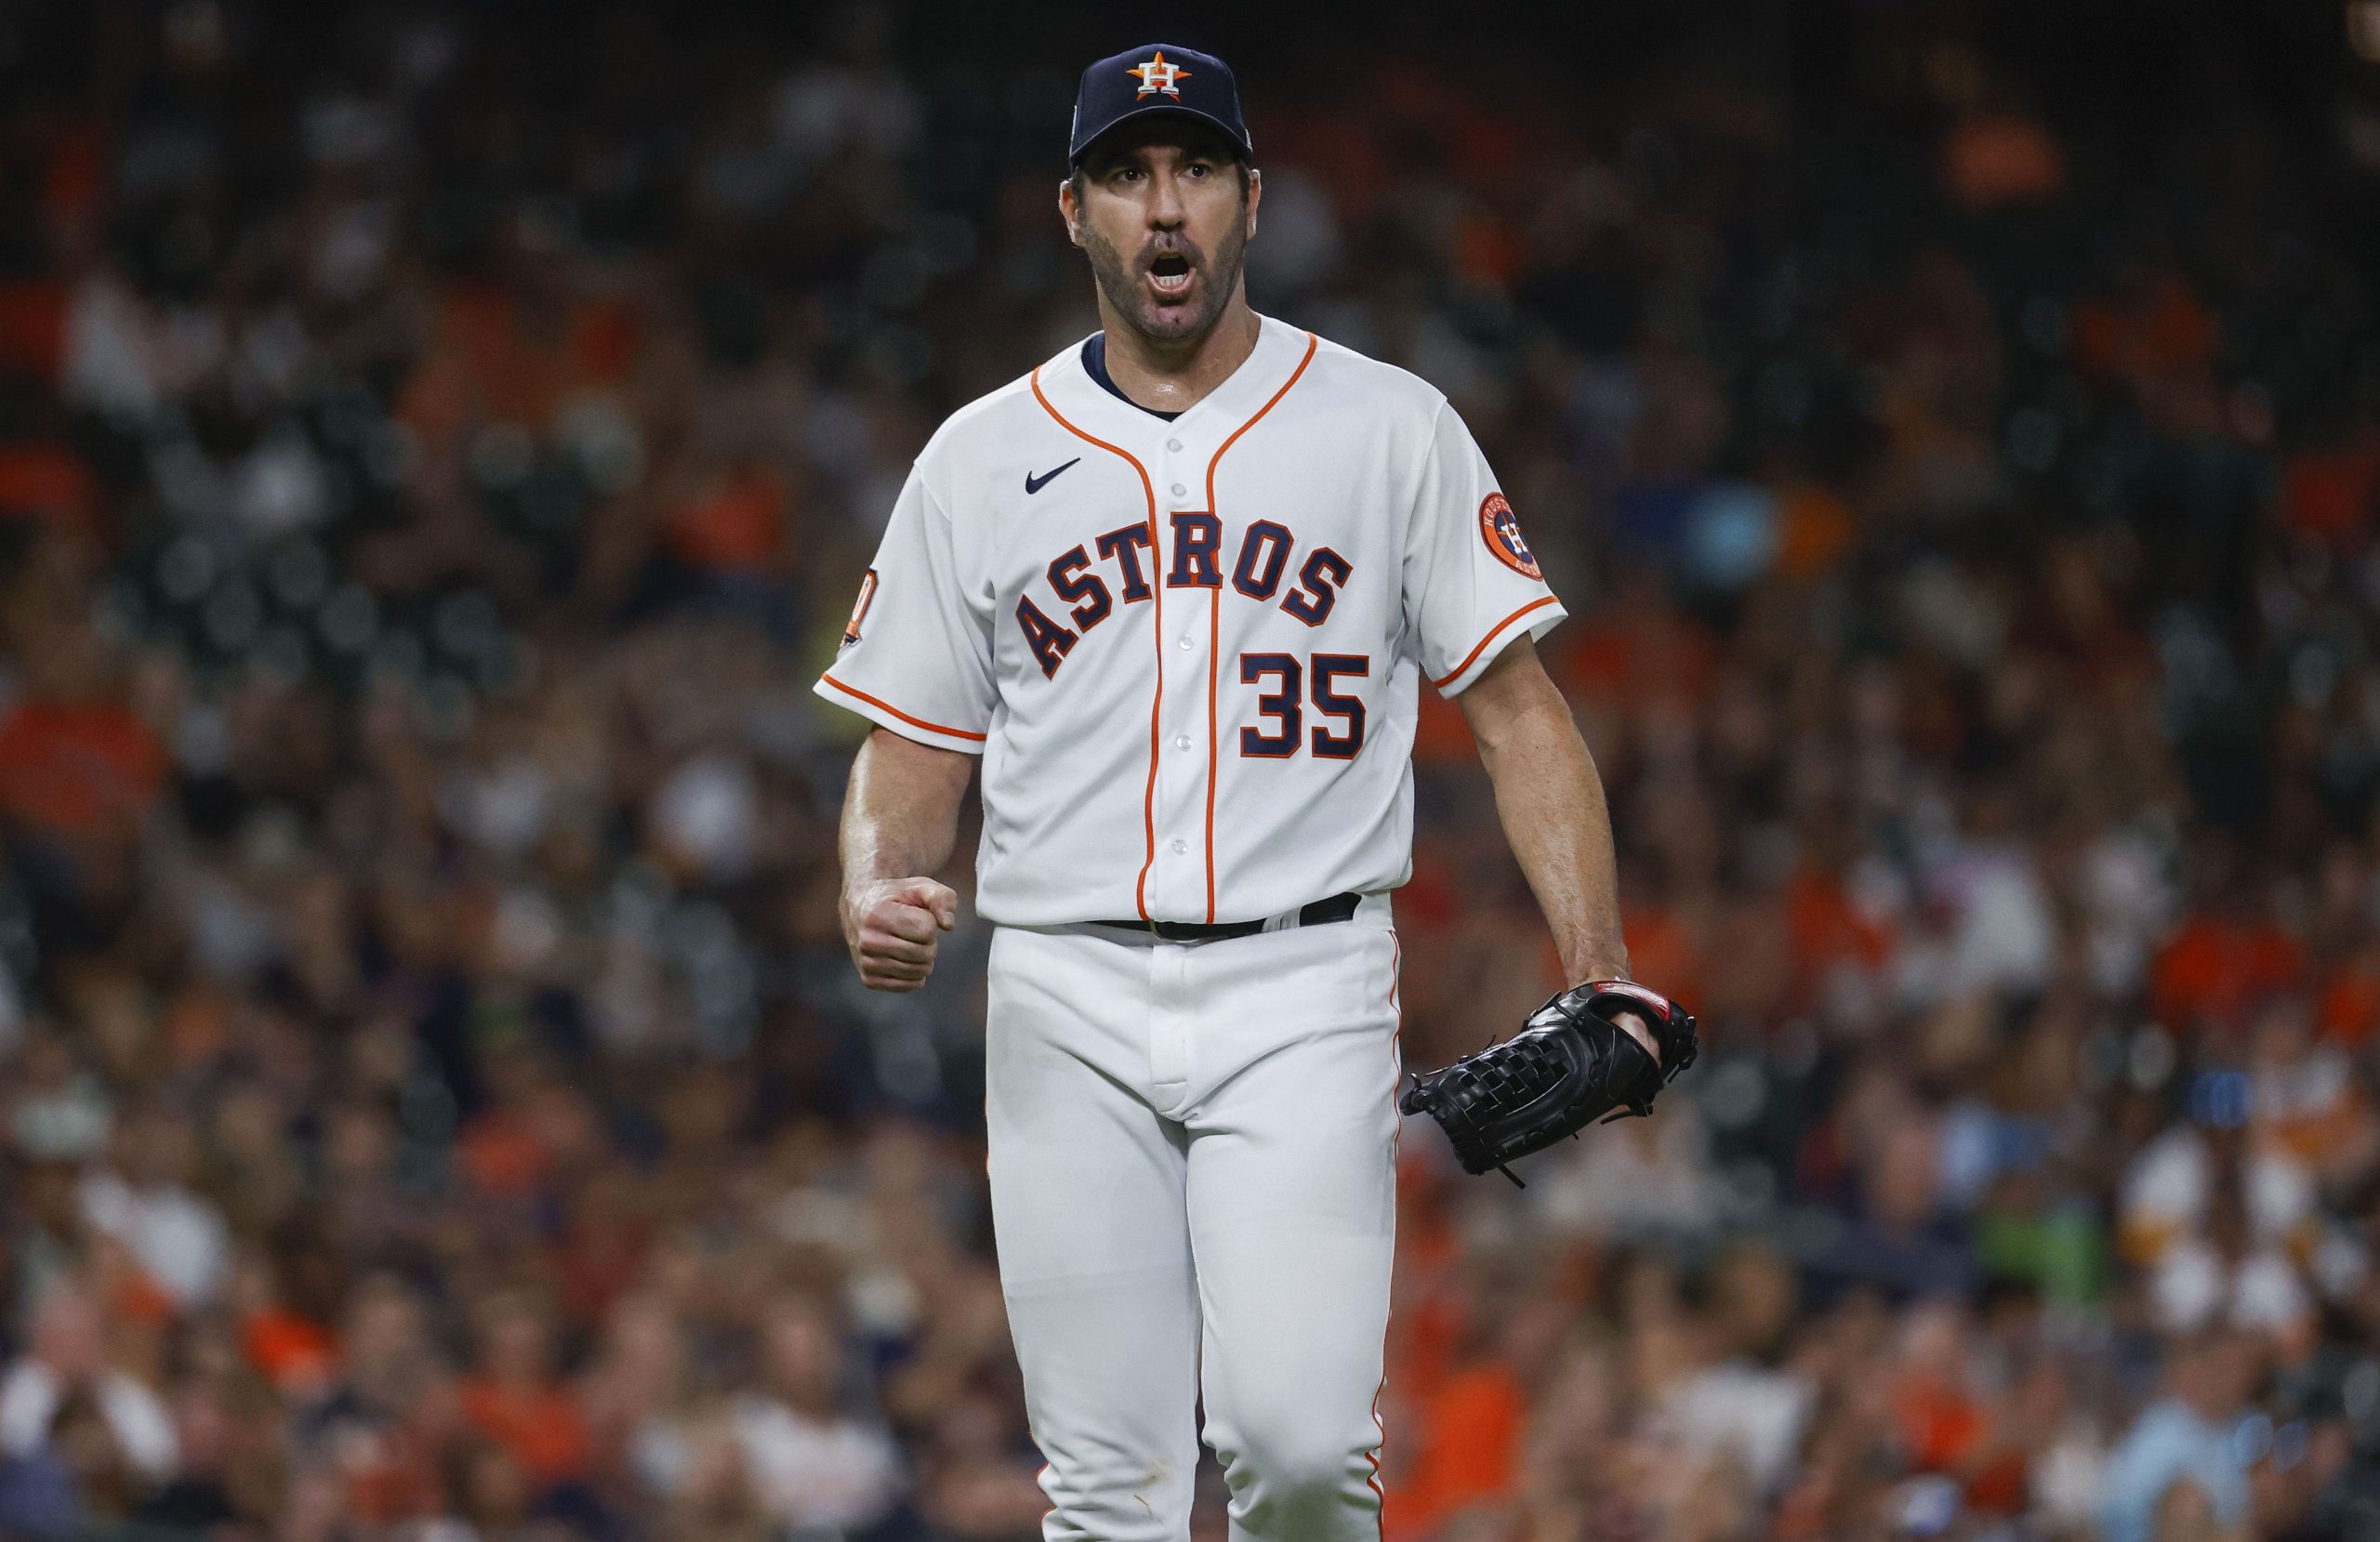 Houston Astros starting pitcher Justin Verlander (35) reacts after getting a strikeout during the sixth inning against the Seattle Mariners at Minute Maid Park